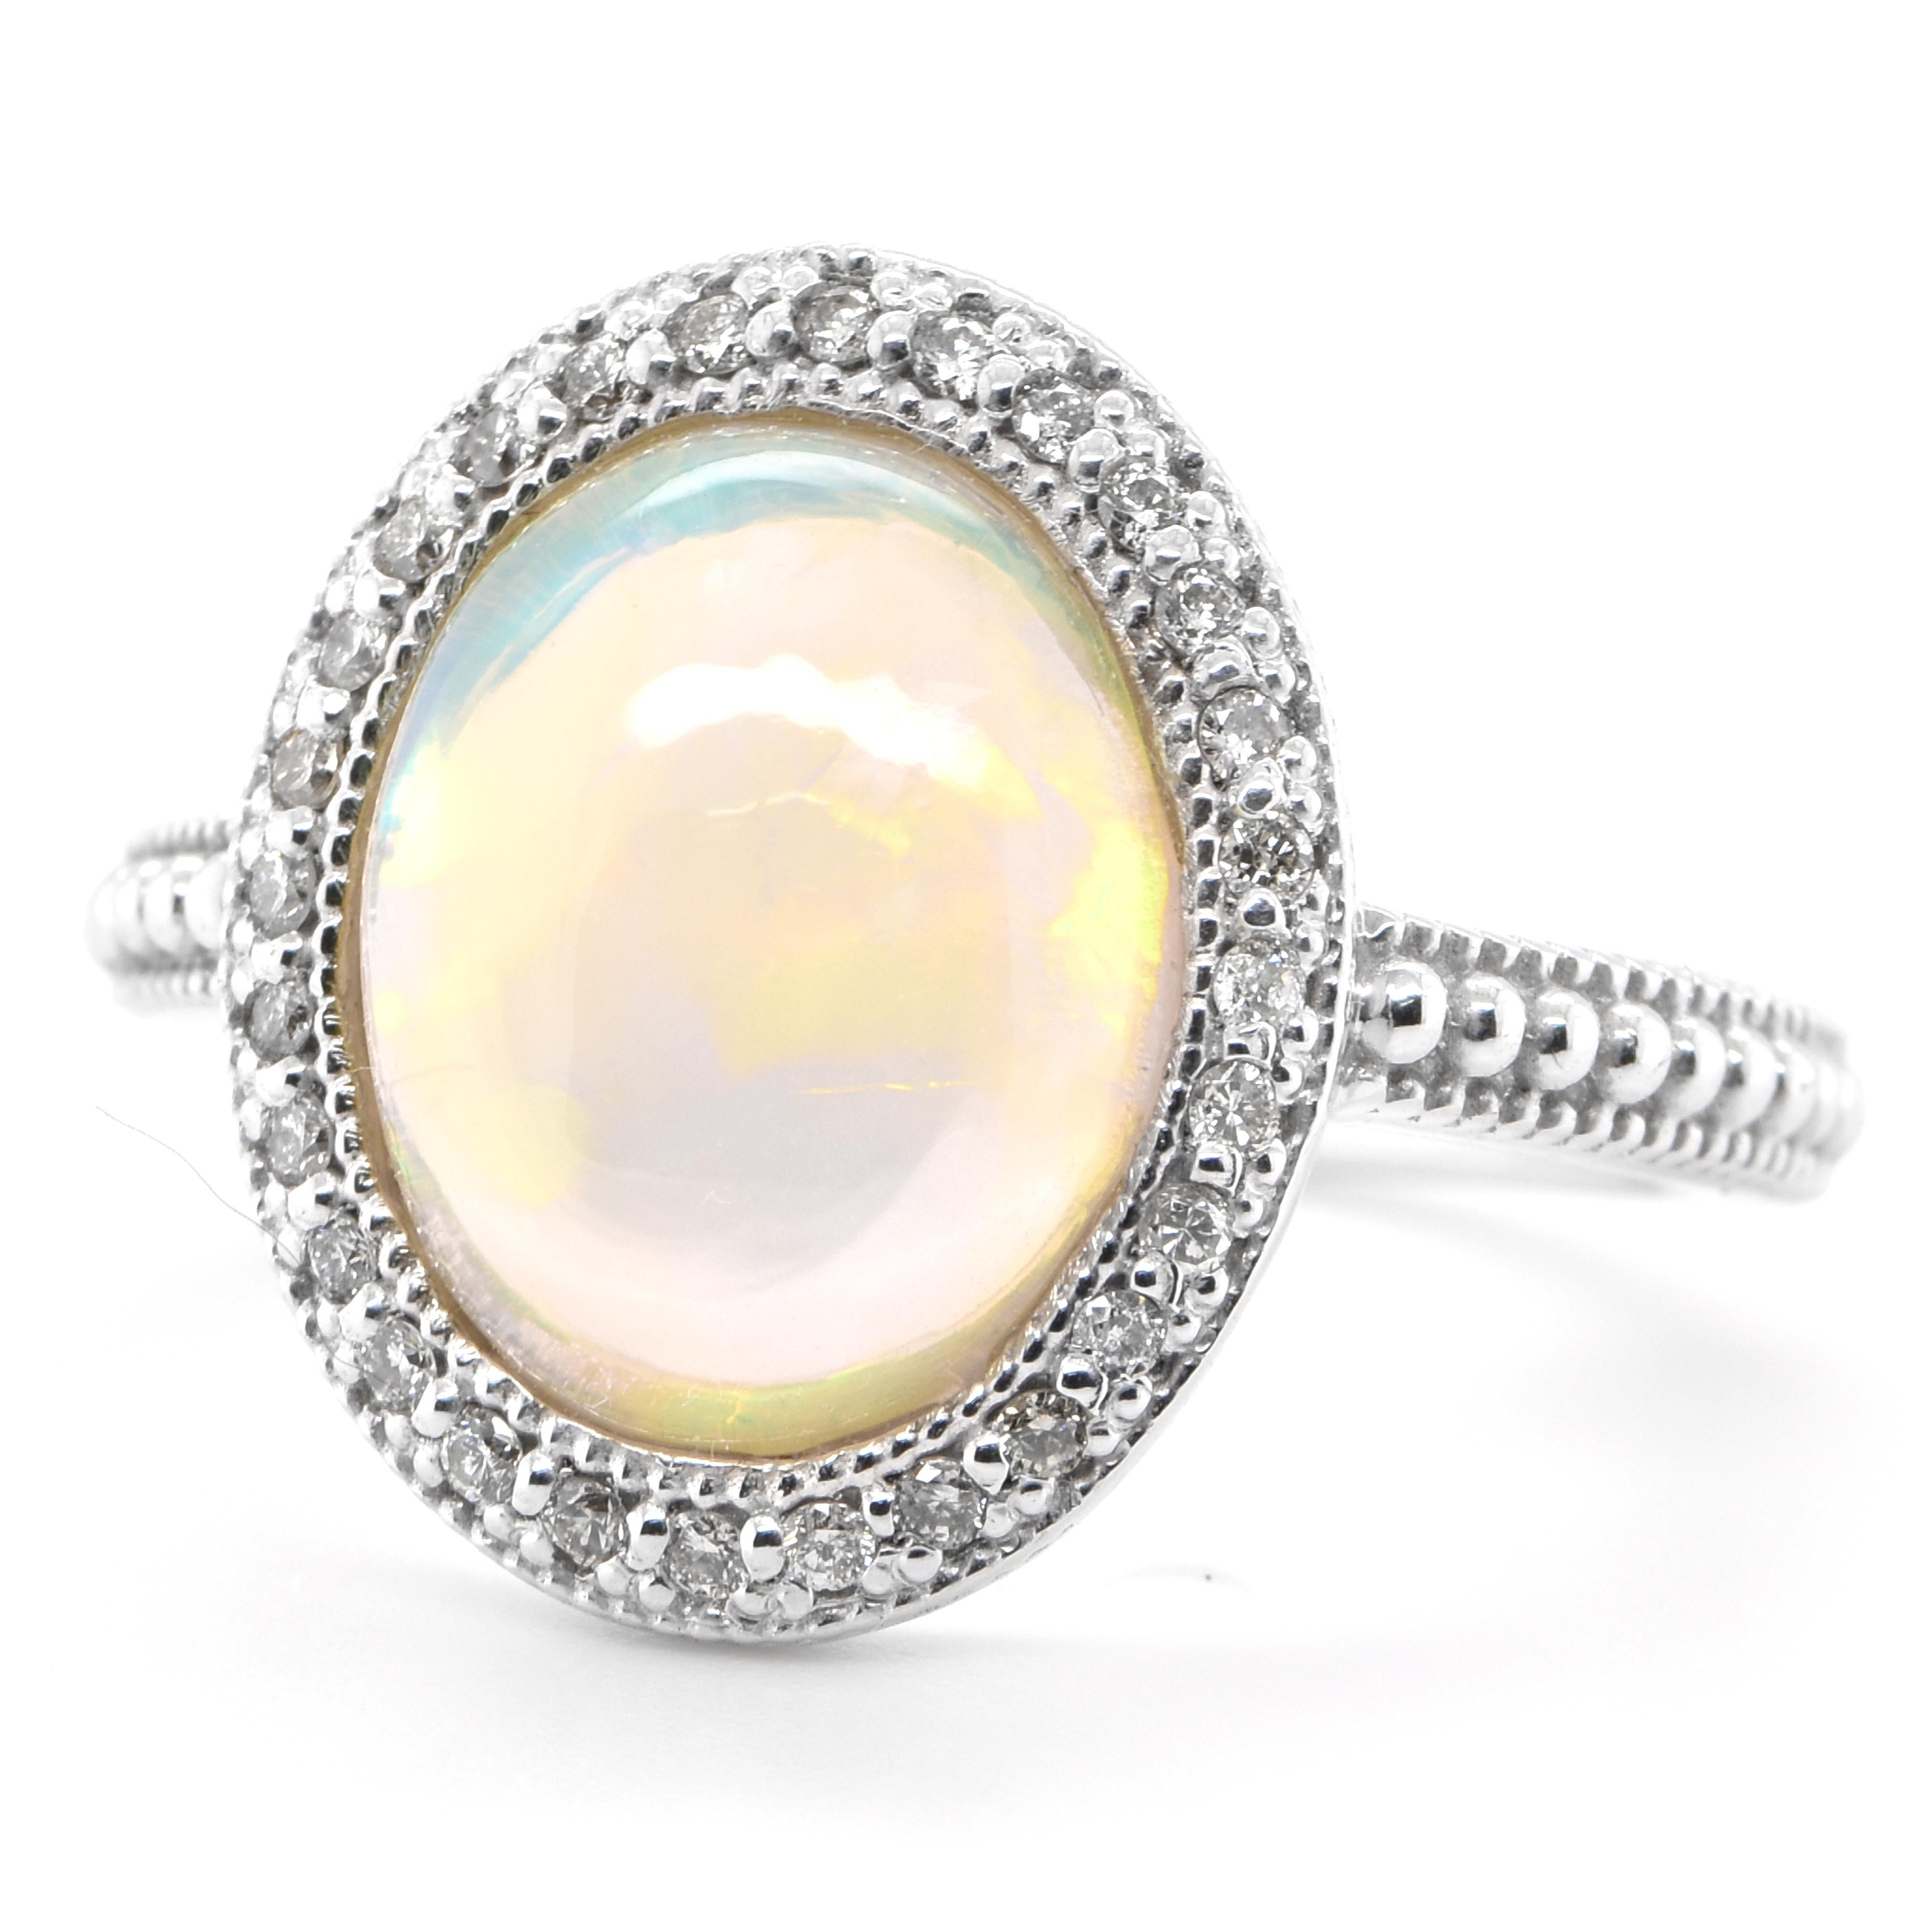 A beautiful vintage ring featuring a 3.54 Carat Natural, White Opal and 0.23 Carats of Diamond Accents set in 18K White Gold. Opals are known for exhibiting flashes of rainbow colors known as 